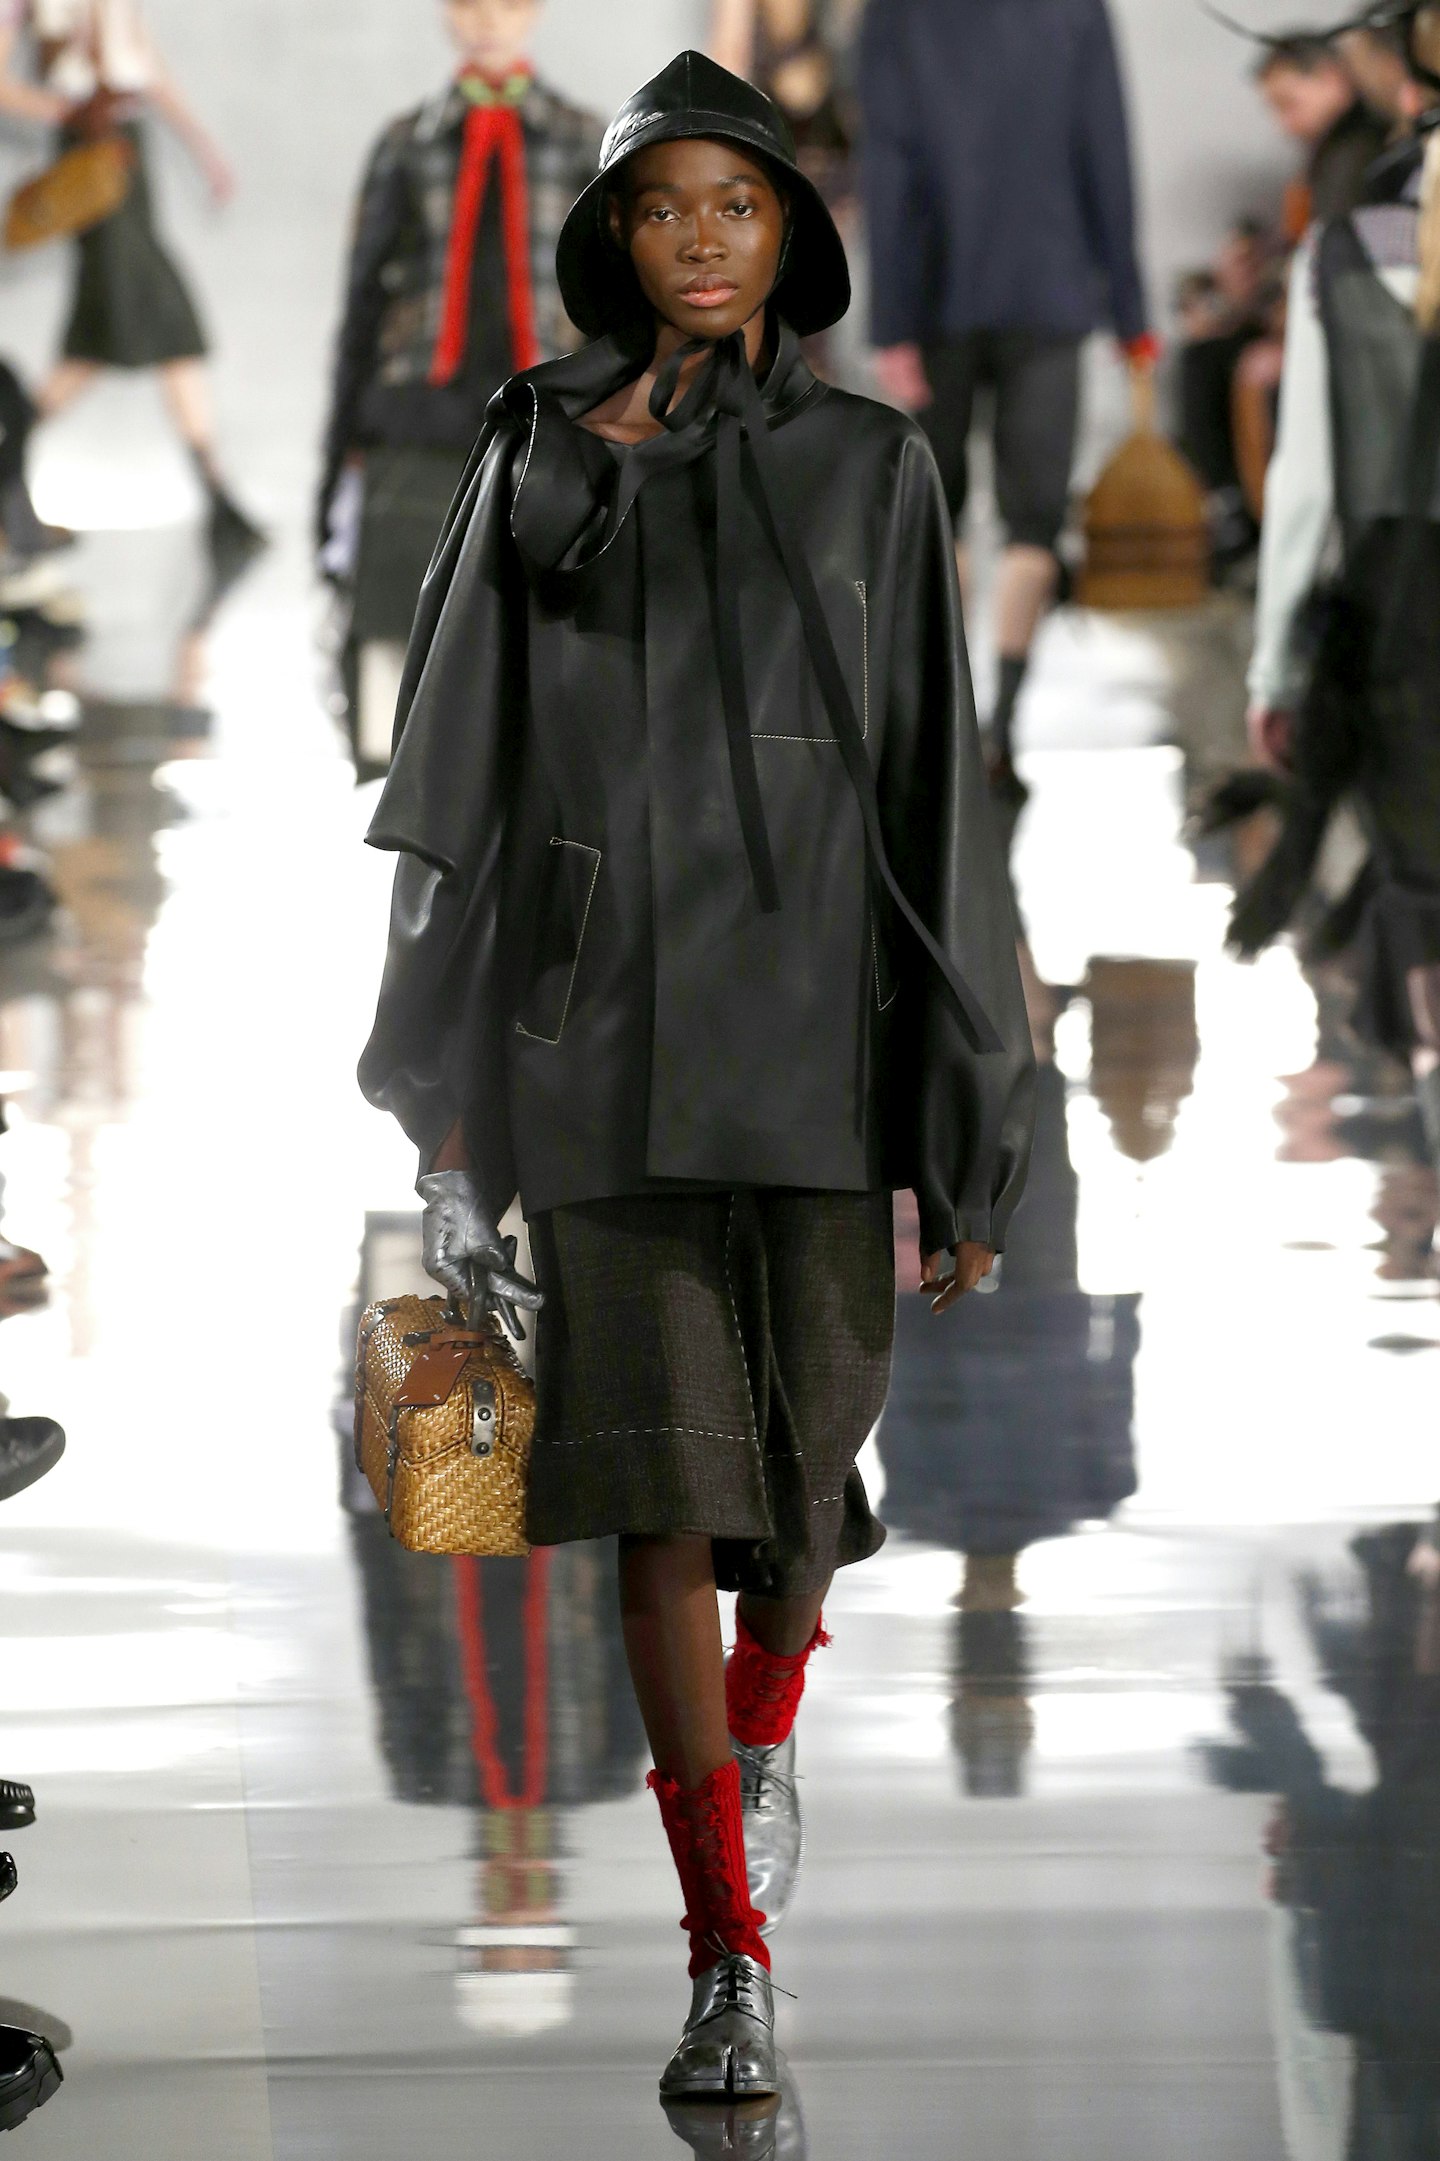 Maison Margiela is, well, weather-appropriate